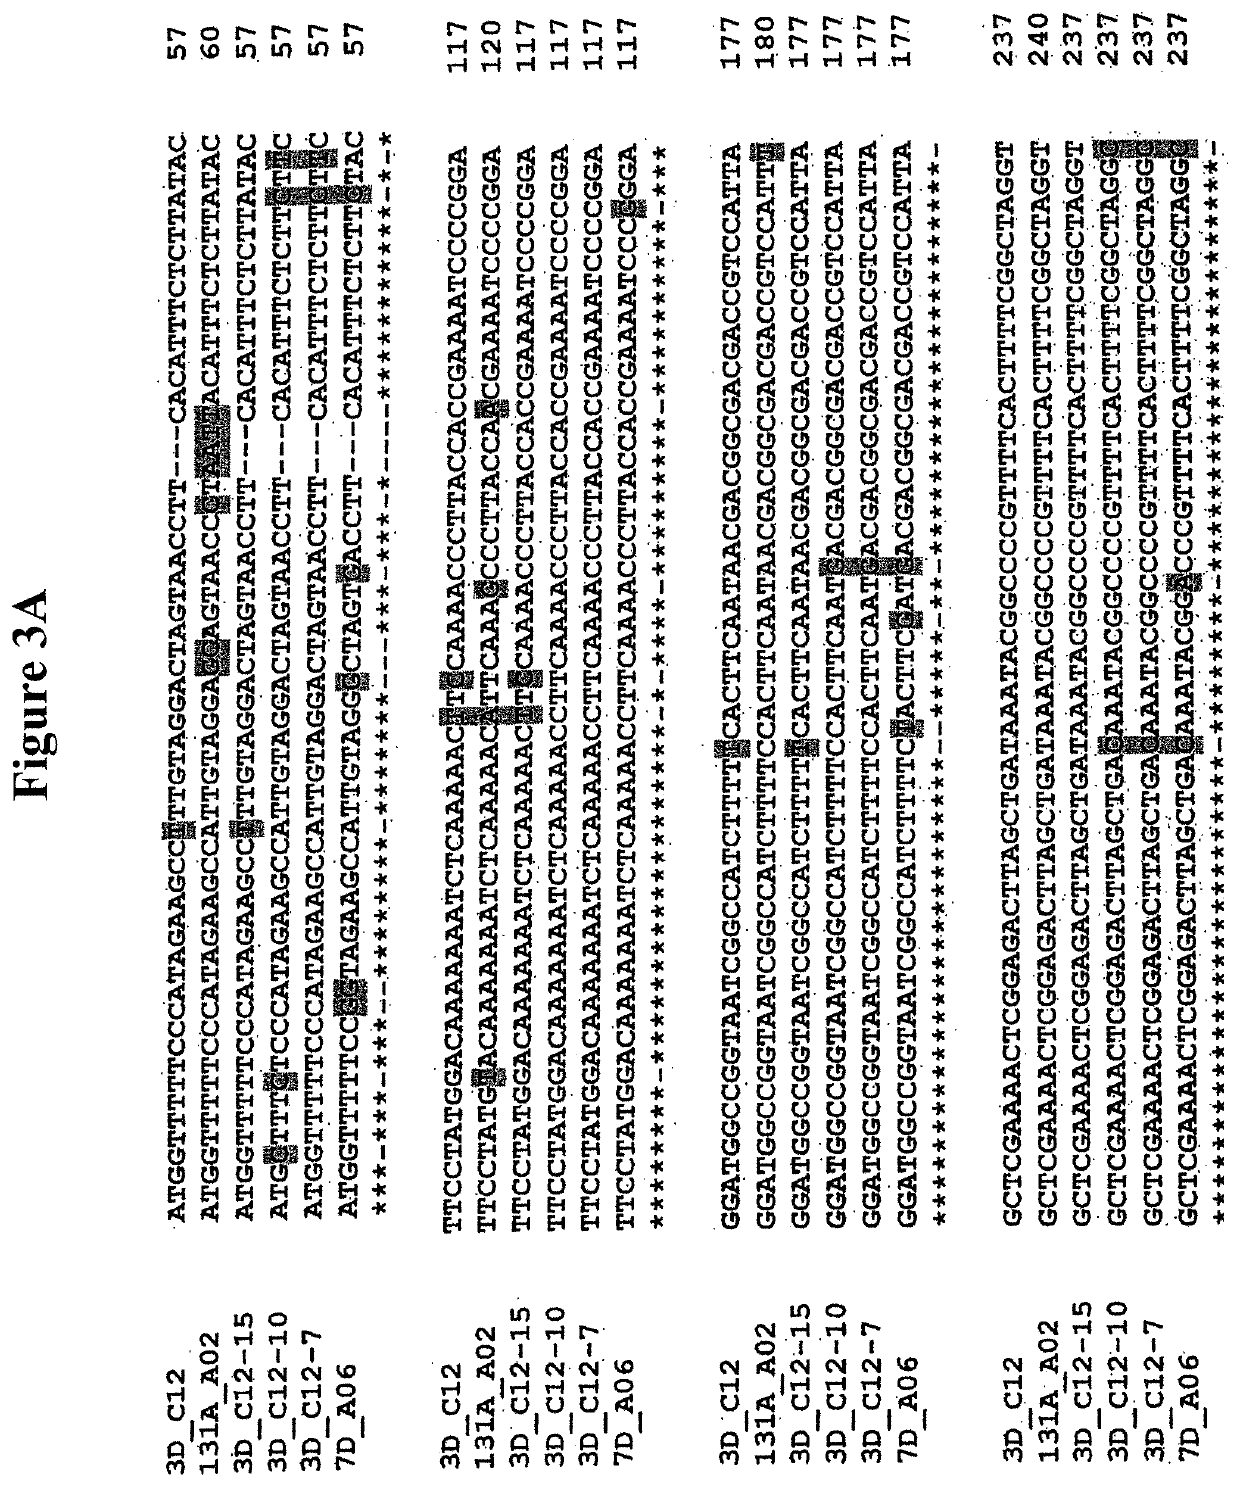 Alteration of tobacco alkaloid content through modification of specific cytochrome p450 genes